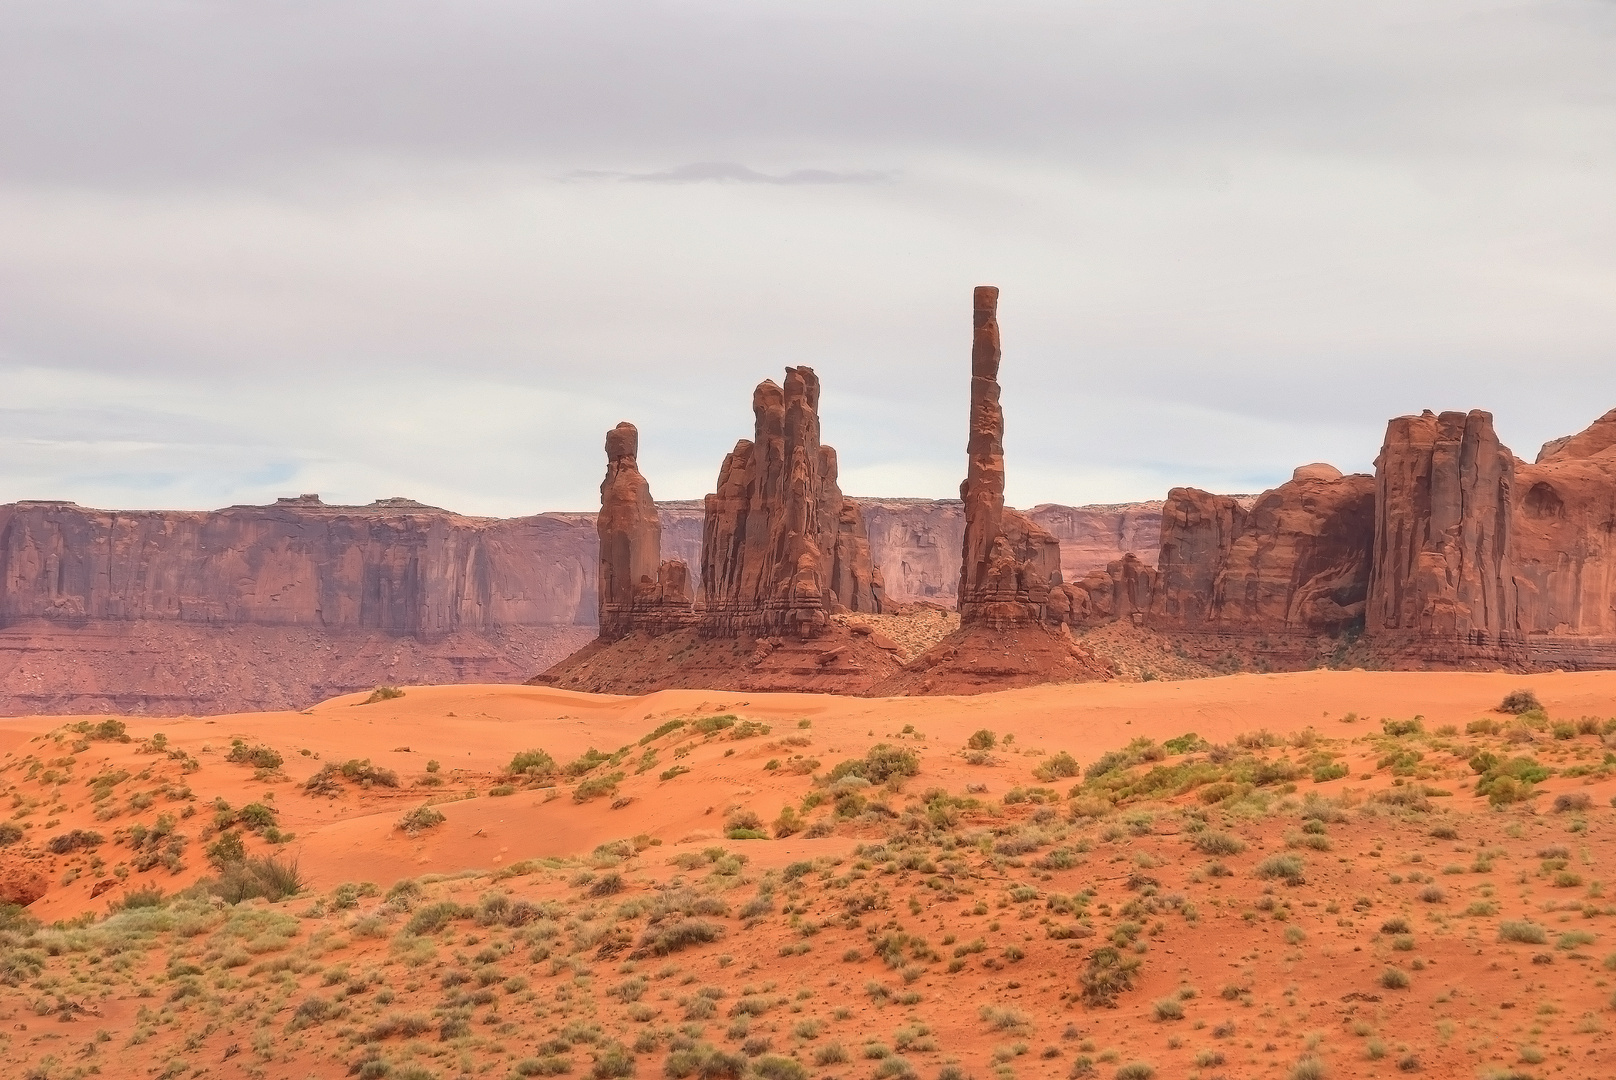 Totem Pole formation in Monument Valley Navajo Tribal Park